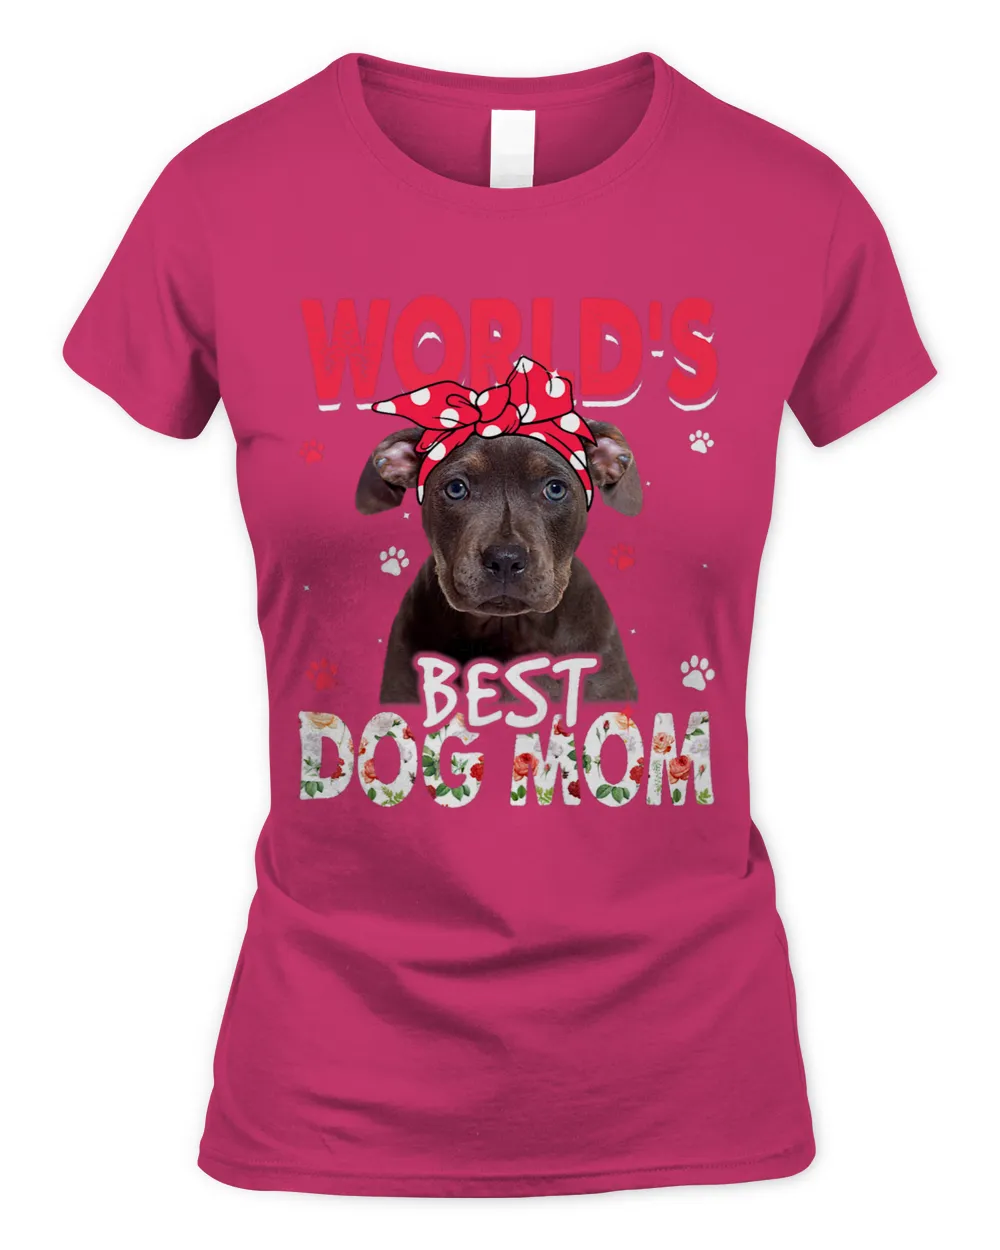 Womens Worlds Best Pitbull Dog Mom Funny Mothers Day